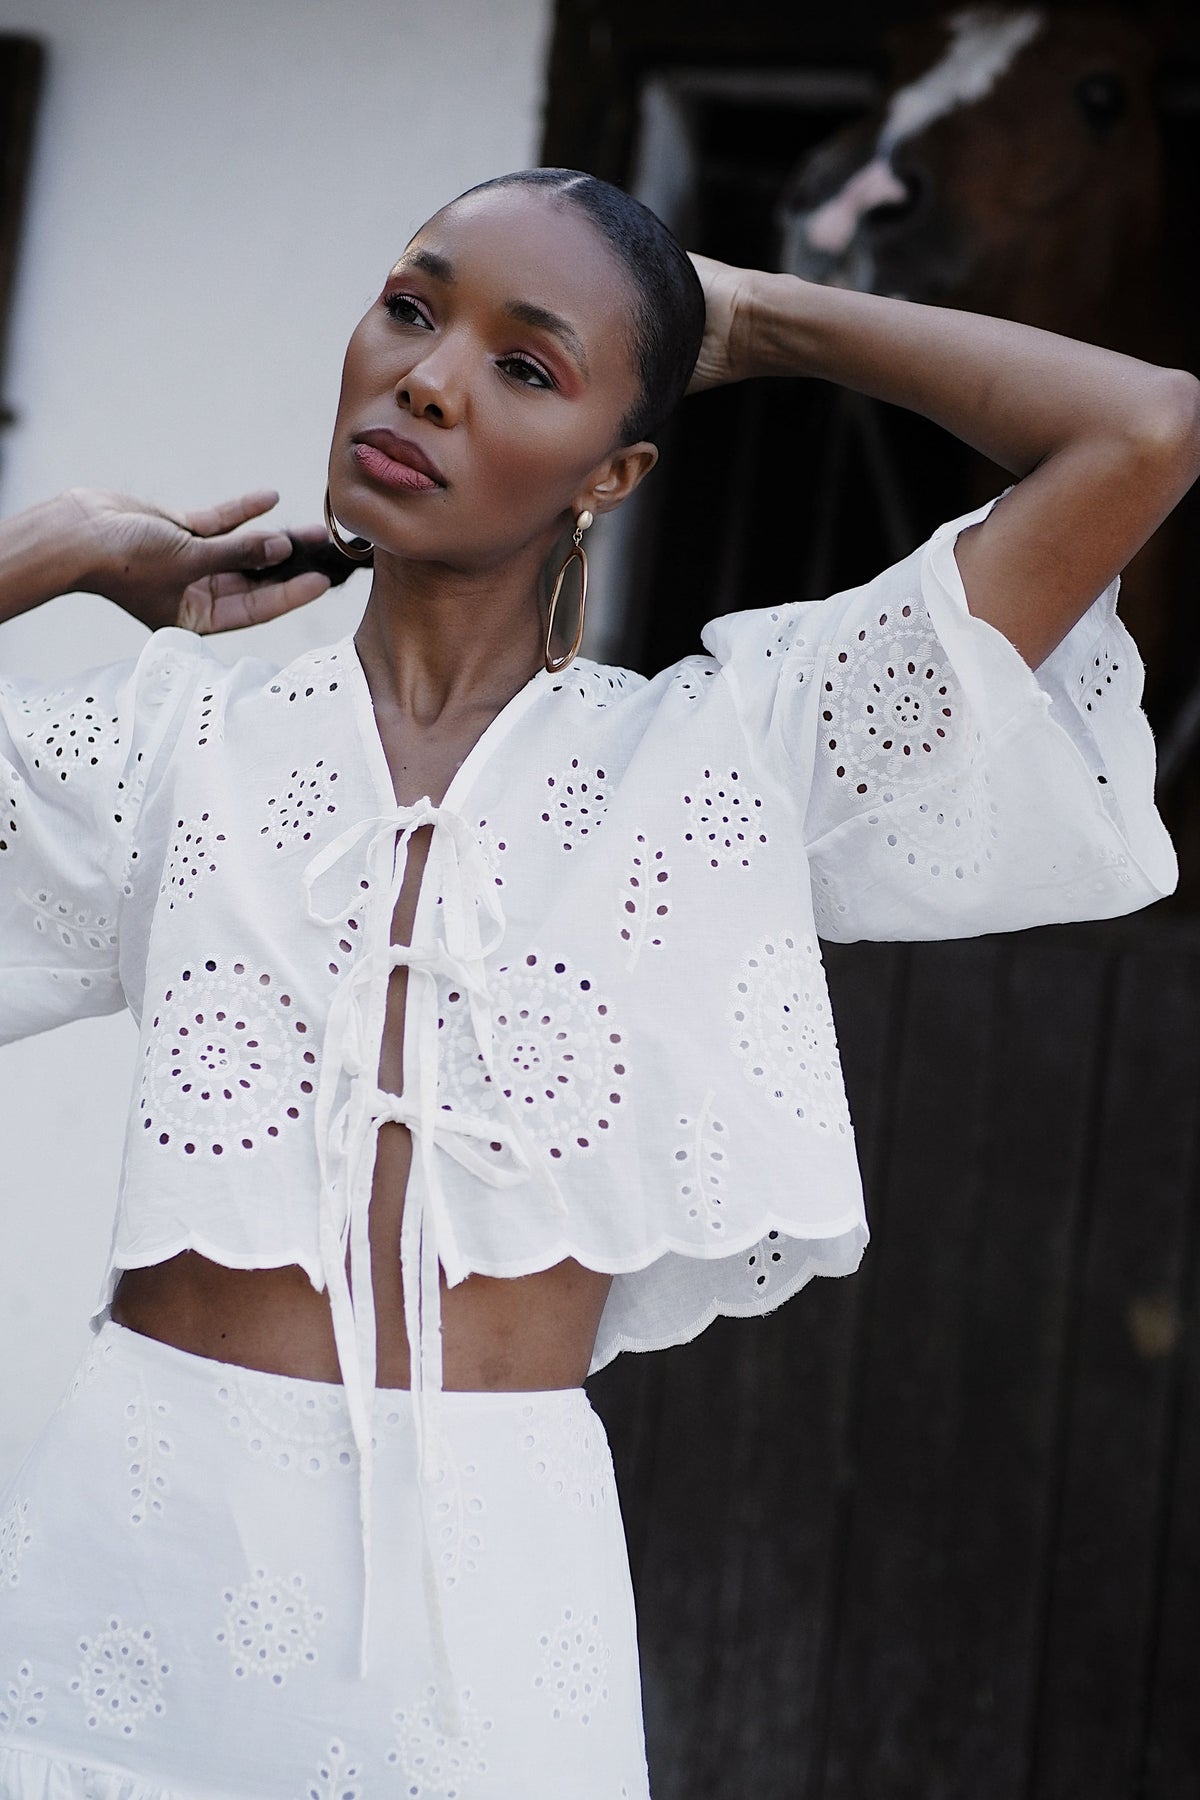 BLOUSE BLANC AVEC BRODERIE ANGLAISE